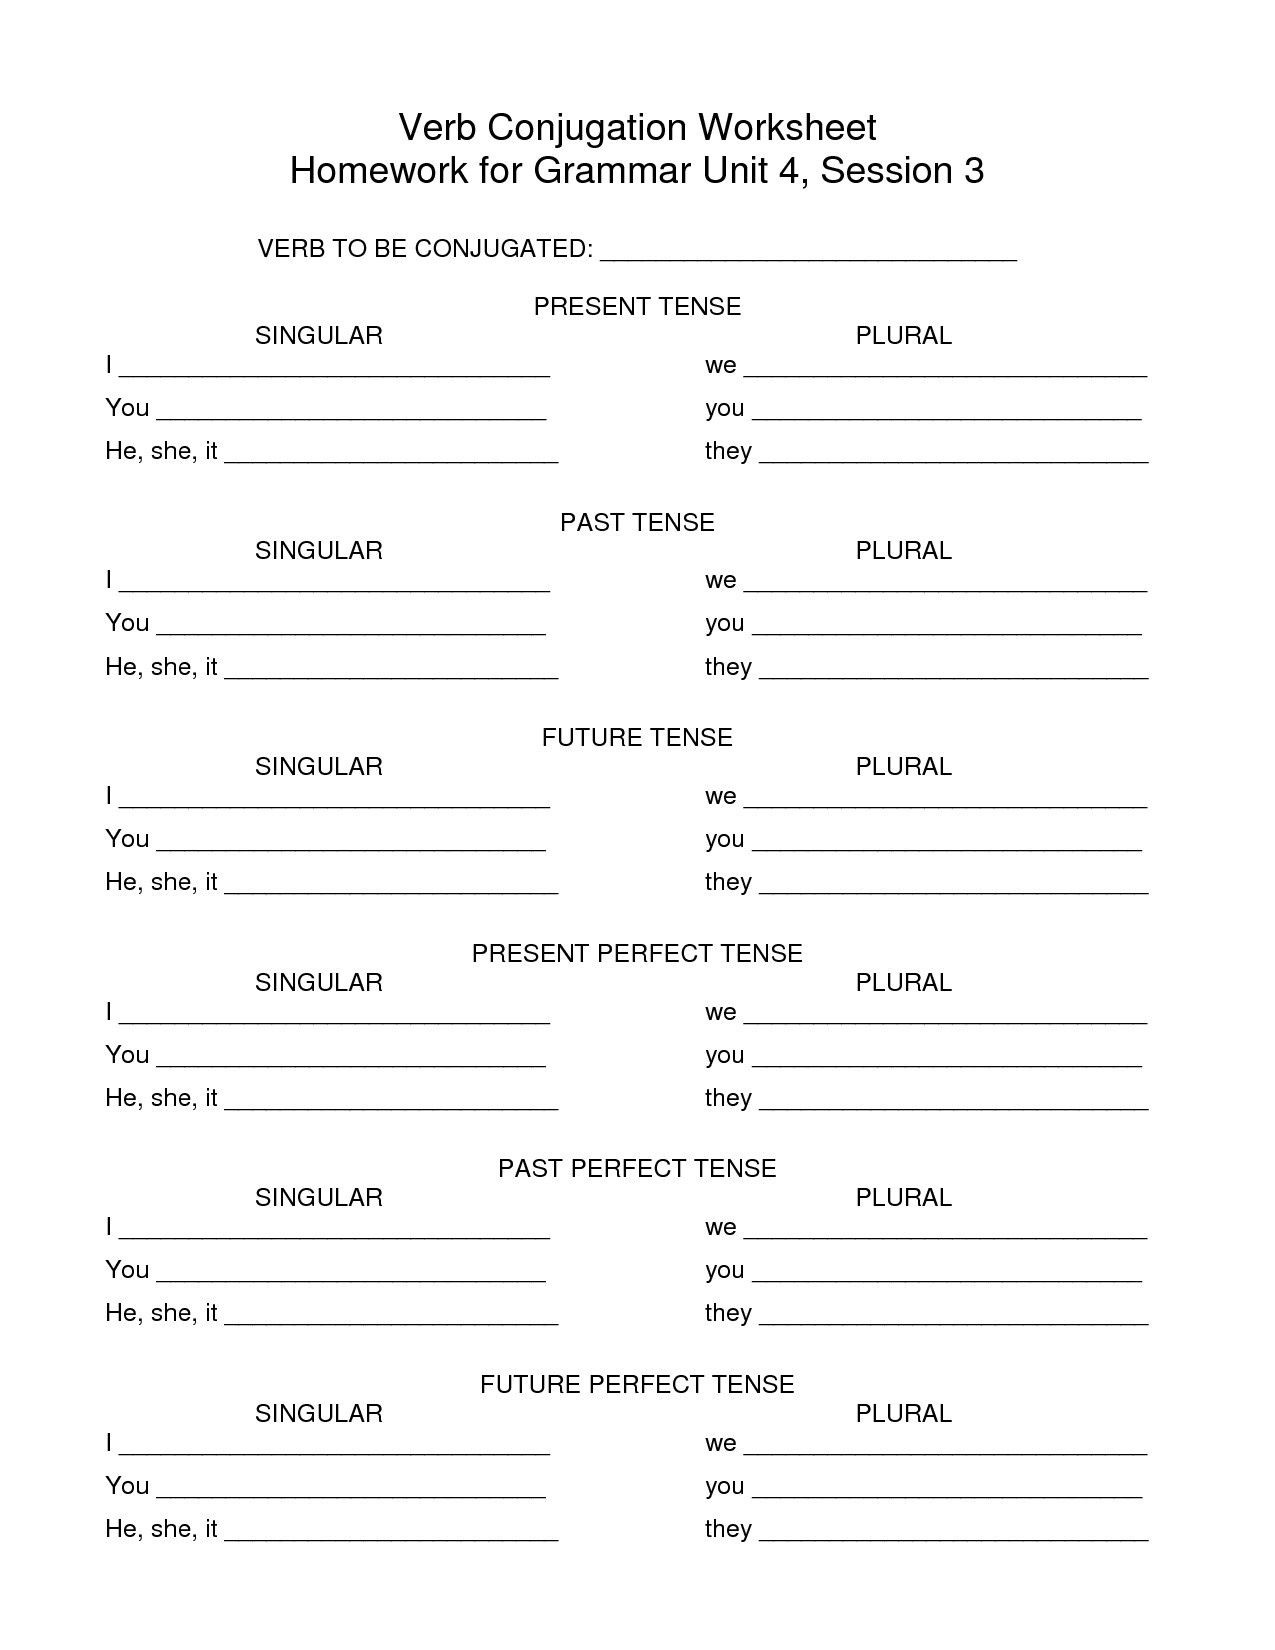 19-best-images-of-present-and-past-tense-worksheets-past-present